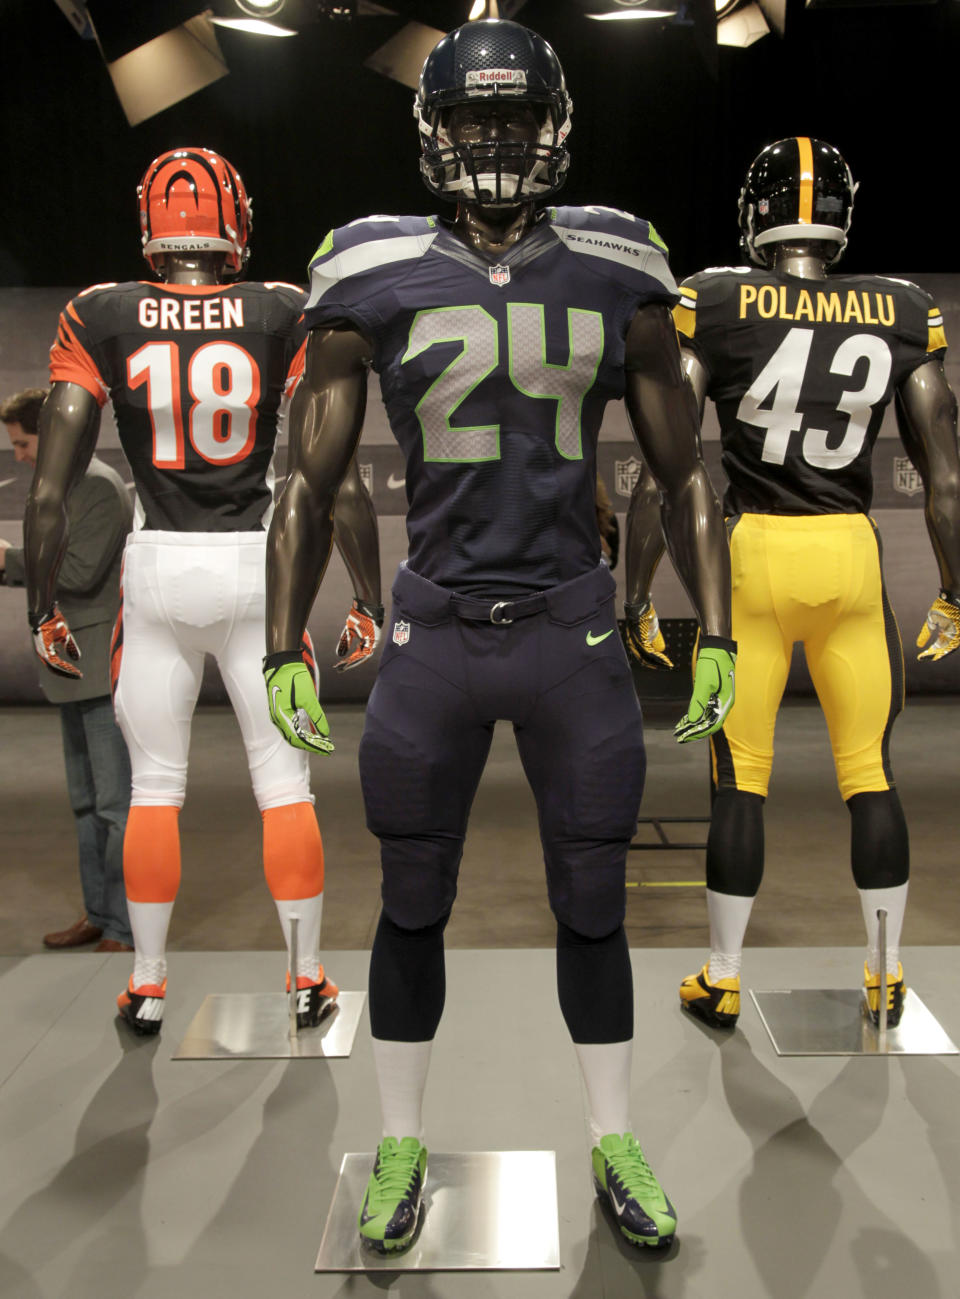 The new Seattle Seahawks uniform, foreground, Pittsburgh Steelers, rear right, and Cincinnati Bengals, rear left, are displayed on mannequins during a presentation in New York, Tuesday, April 3, 2012. The NFL and Nike showed off the new gear in grand style with a gridiron-themed fashion show at a Brooklyn film studio. (AP Photo/Seth Wenig)